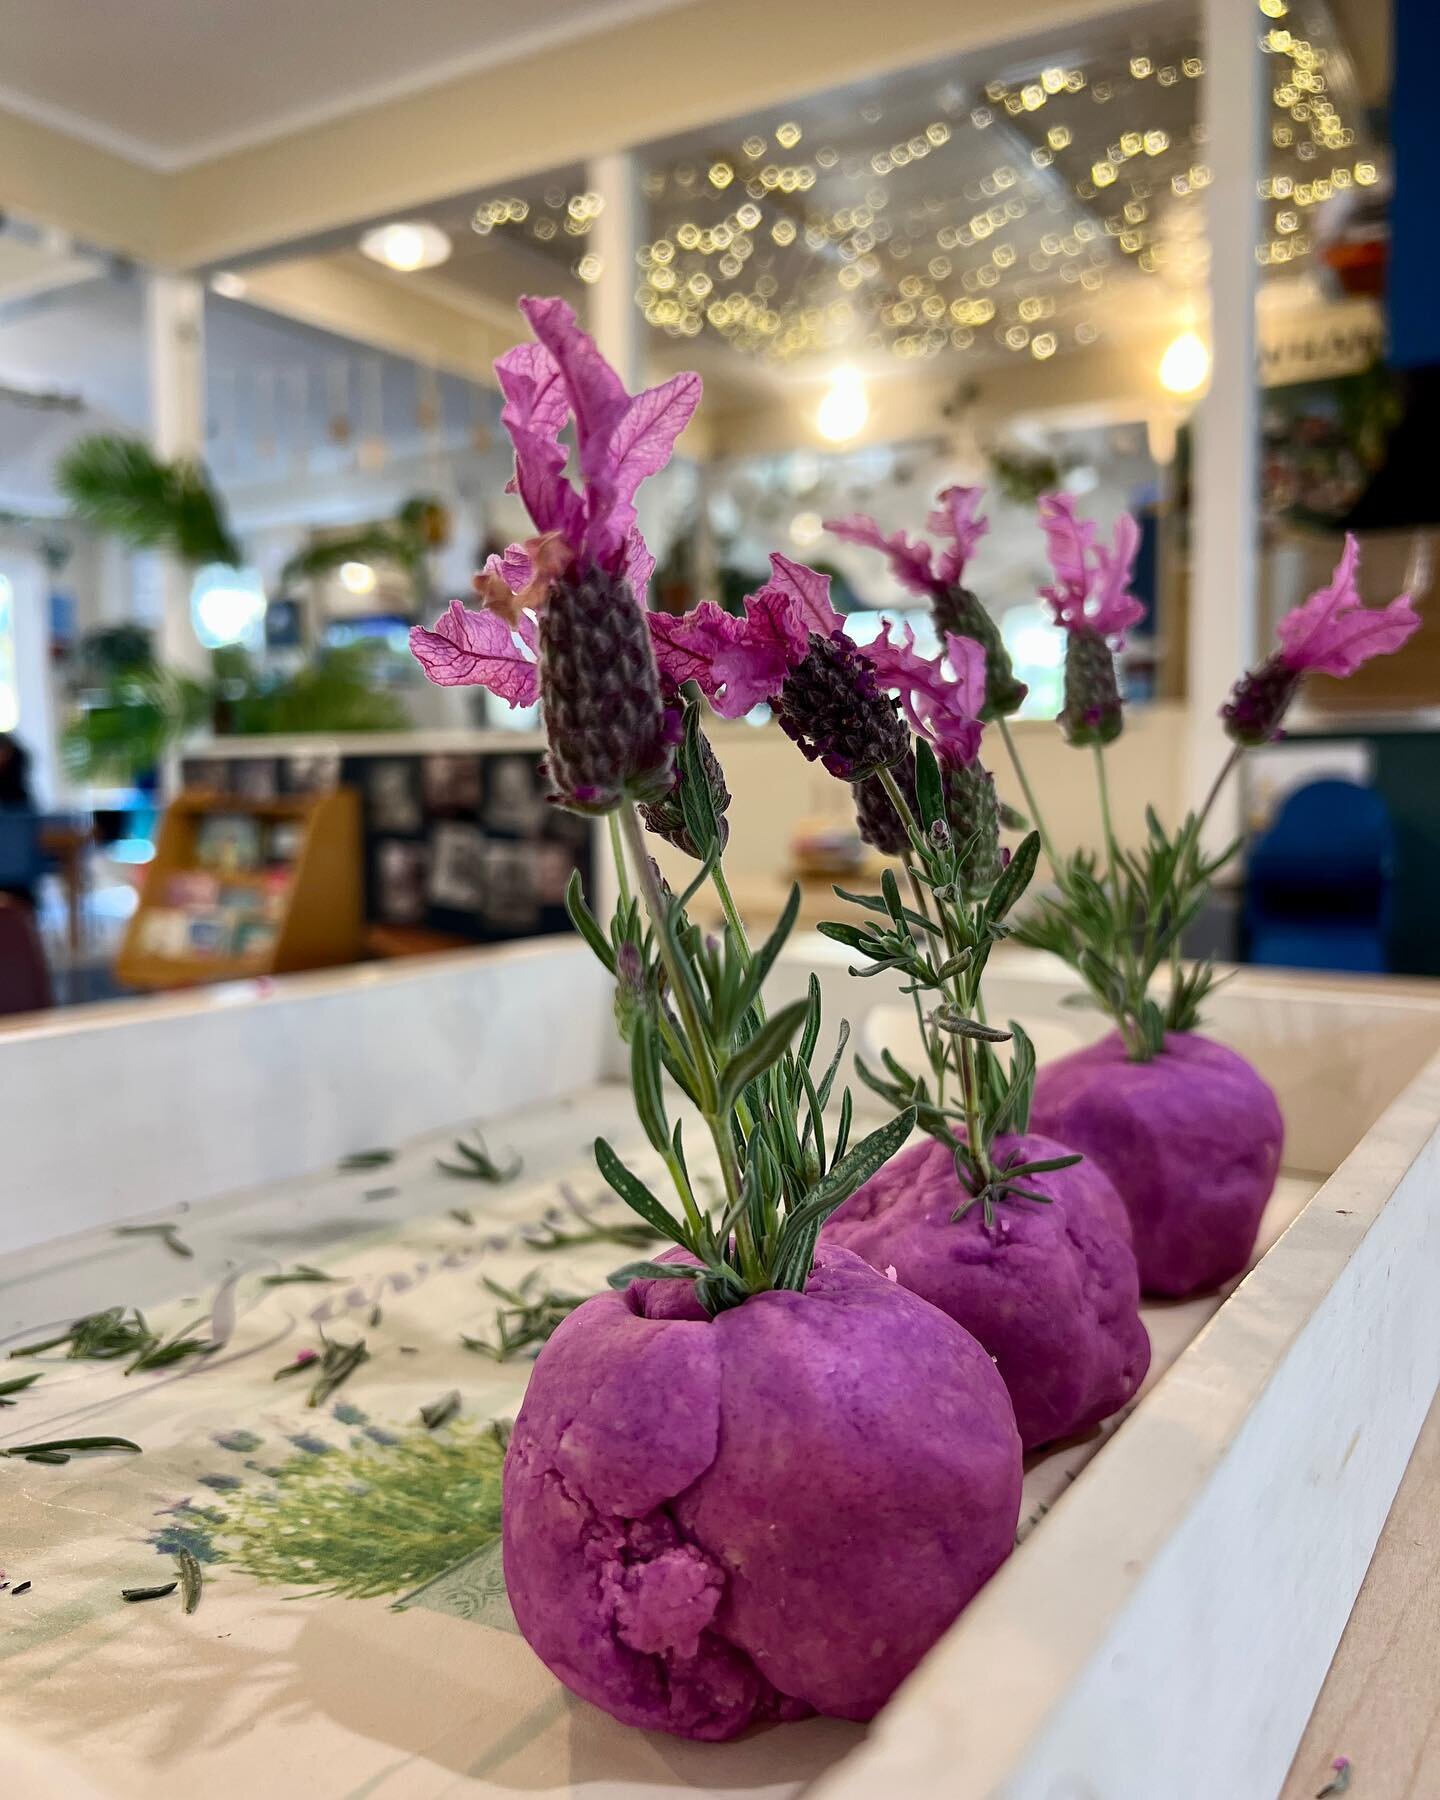 Check out this play dough adventure! What a cool lavender themed invitation to play at Tūī Twos &amp; Tots! As well as learning more about lavender and the colour purple/waiporoporo this is a rich sensory experience giving the two year olds a opportu